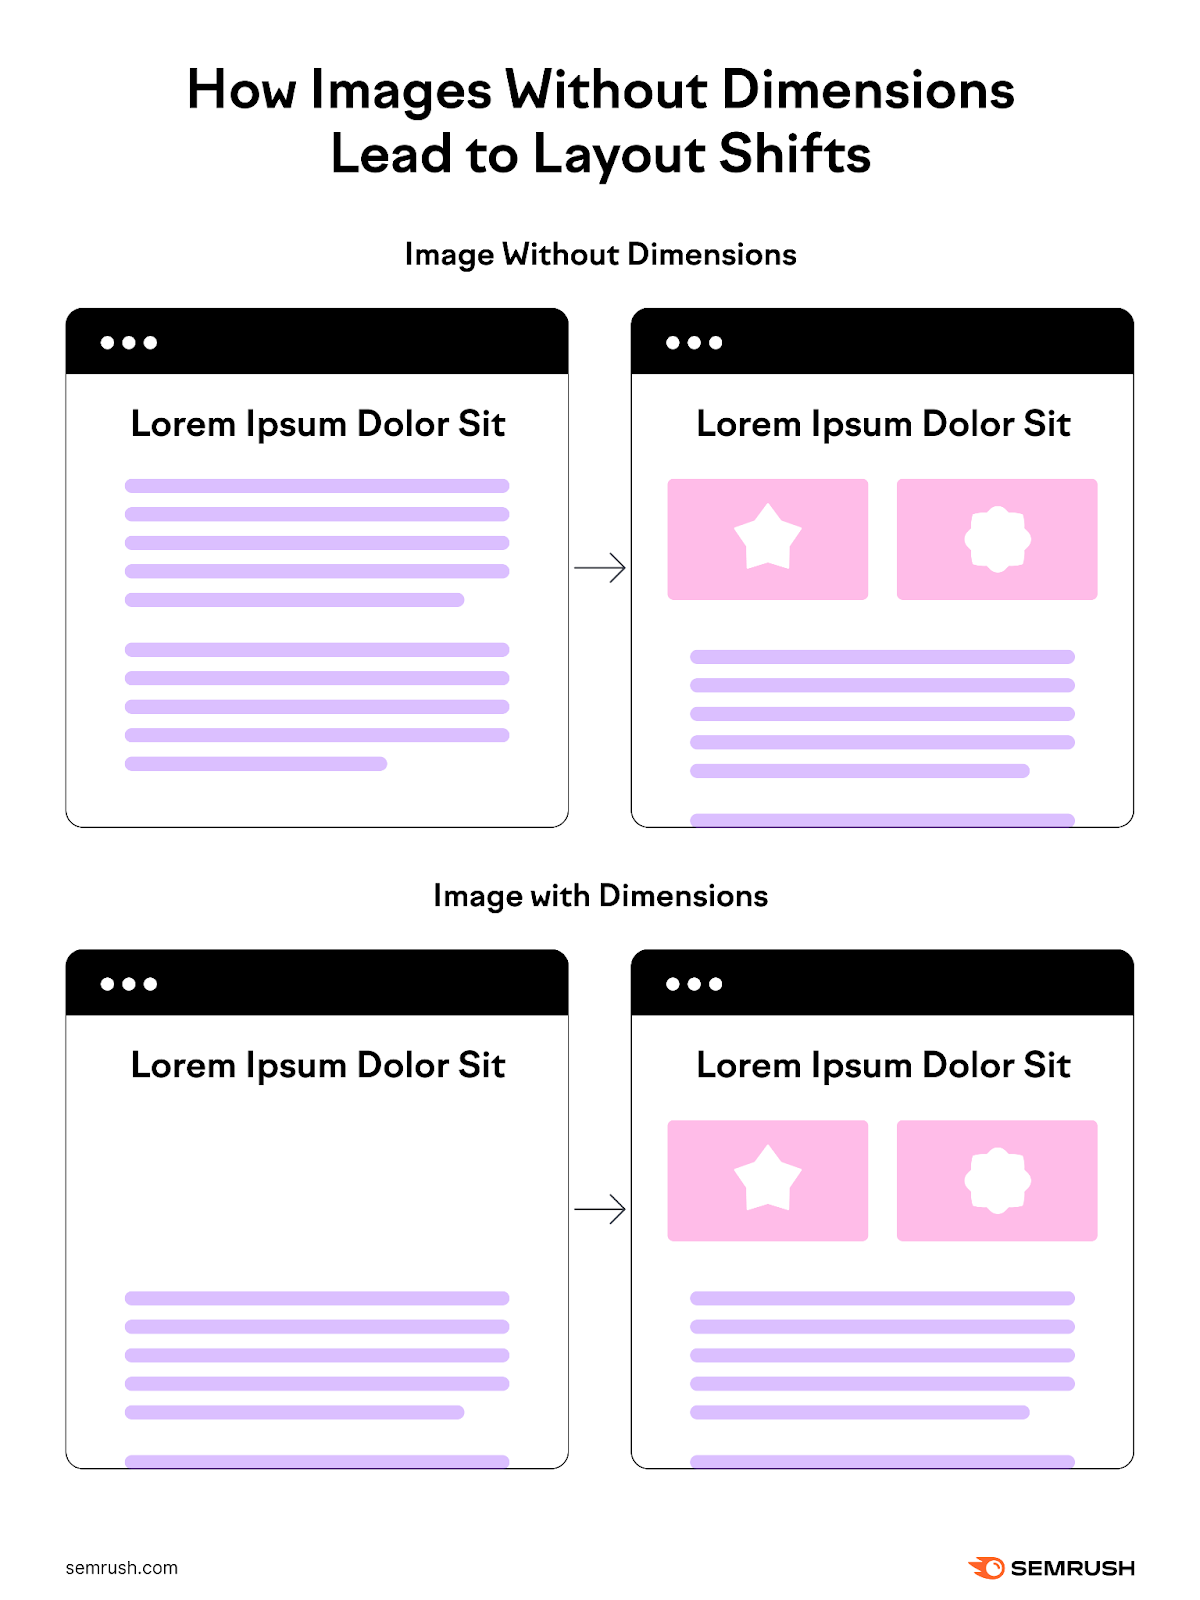 Top illustration showing how layout shifts arise from not specifying image dimensions, with a bottom diagram showing how the layout doesn’t shift when you specify dimensions.